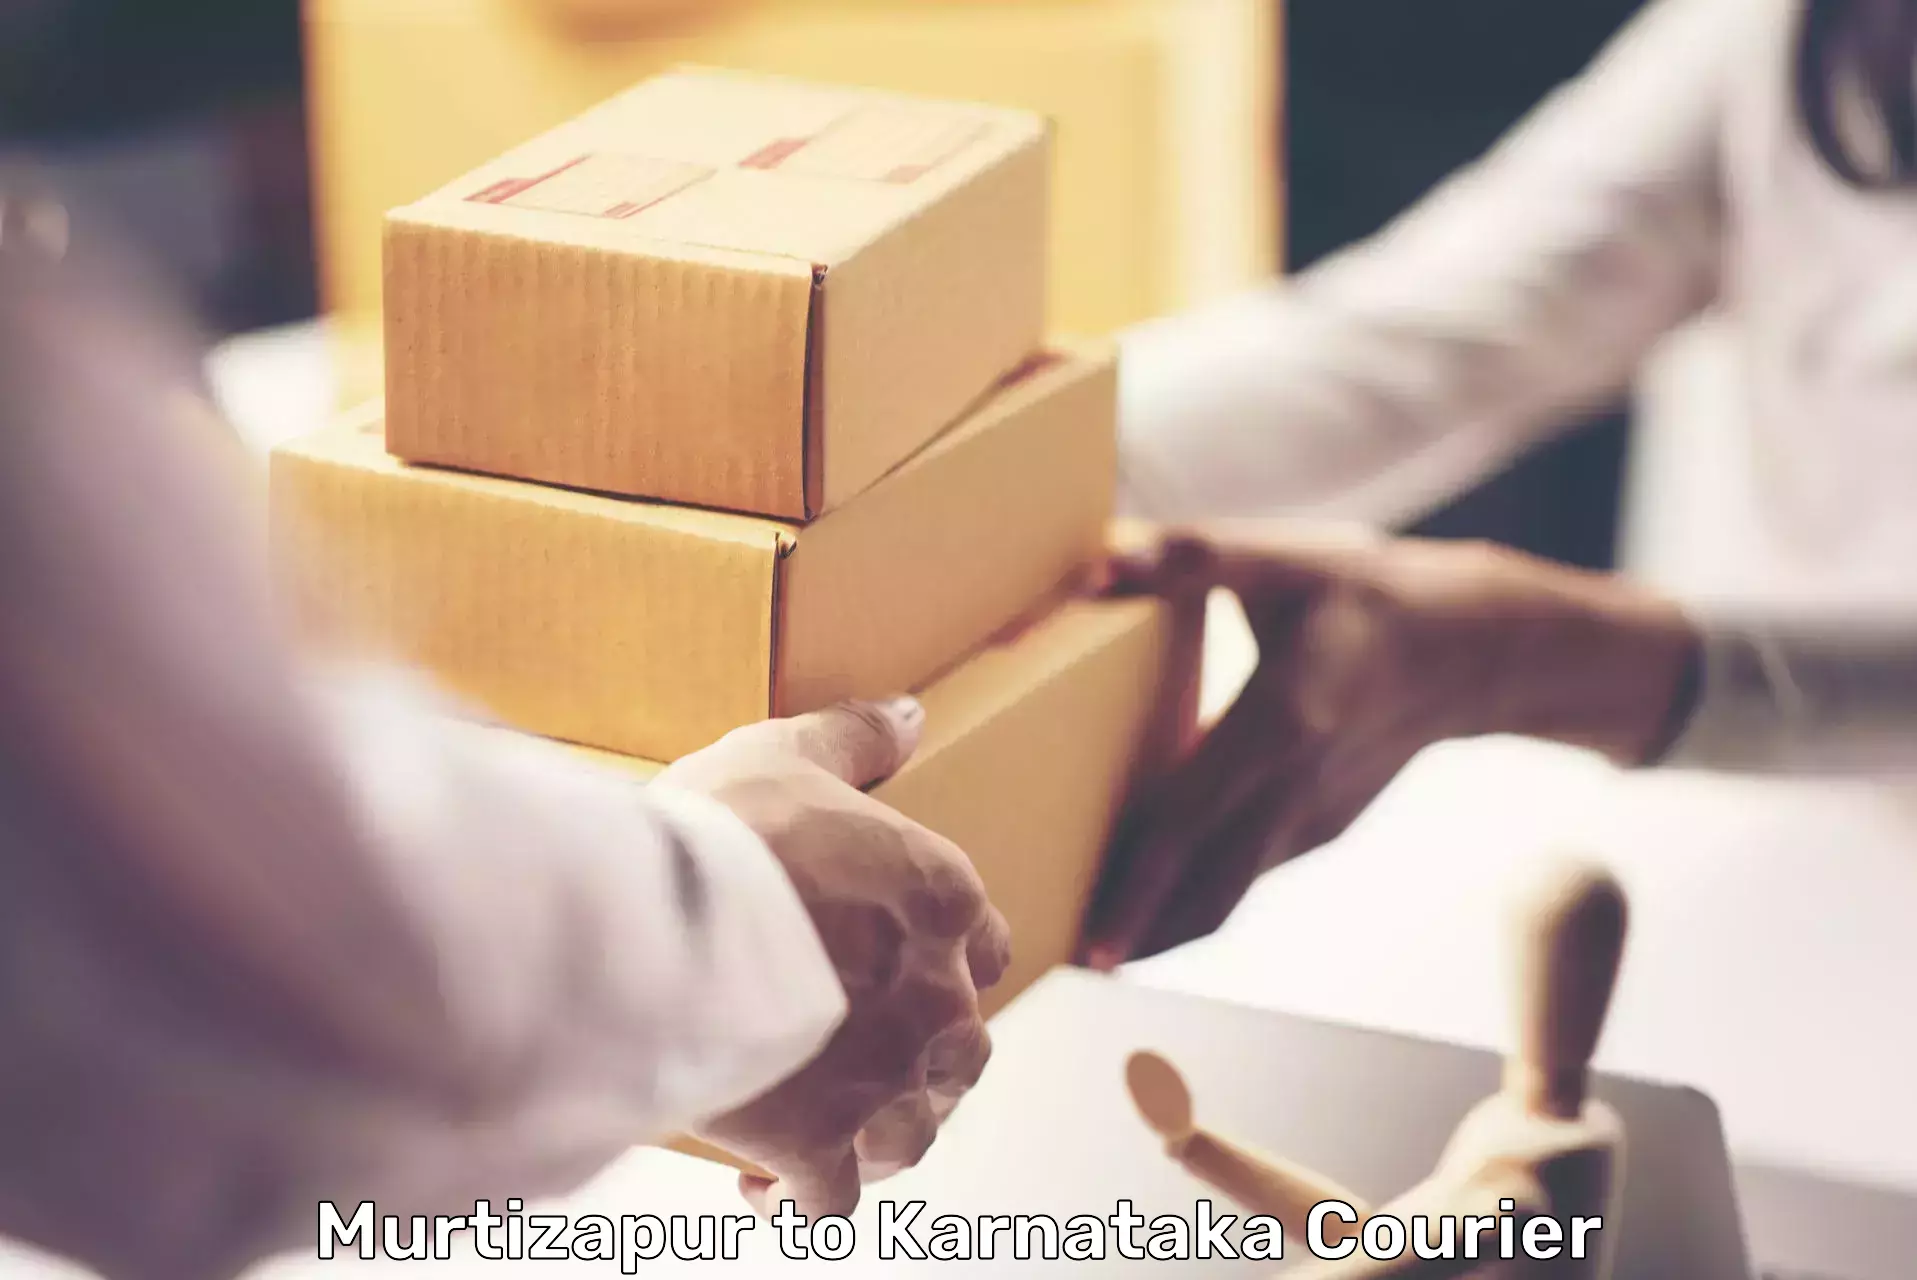 Global courier networks Murtizapur to Chittapur